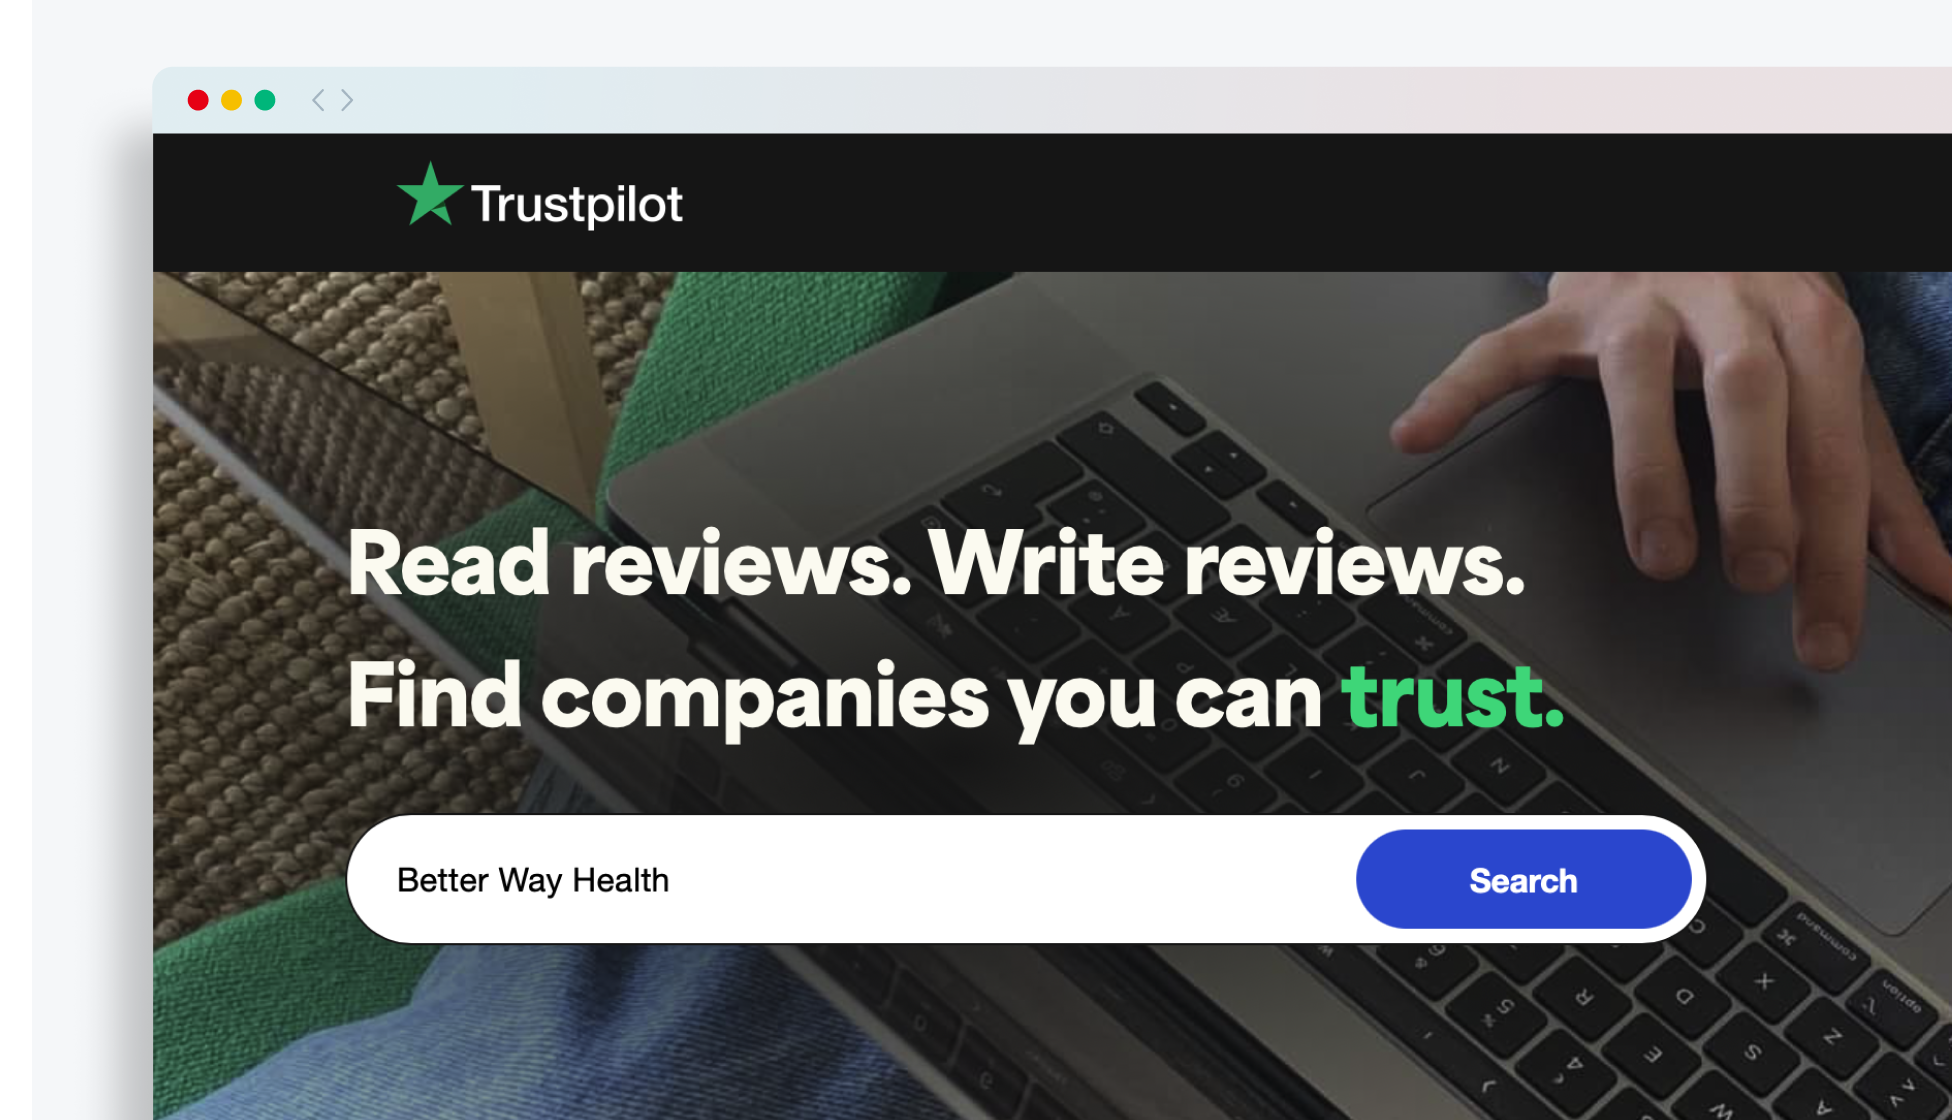 Who Is Trustpilot and Why Should You Care?